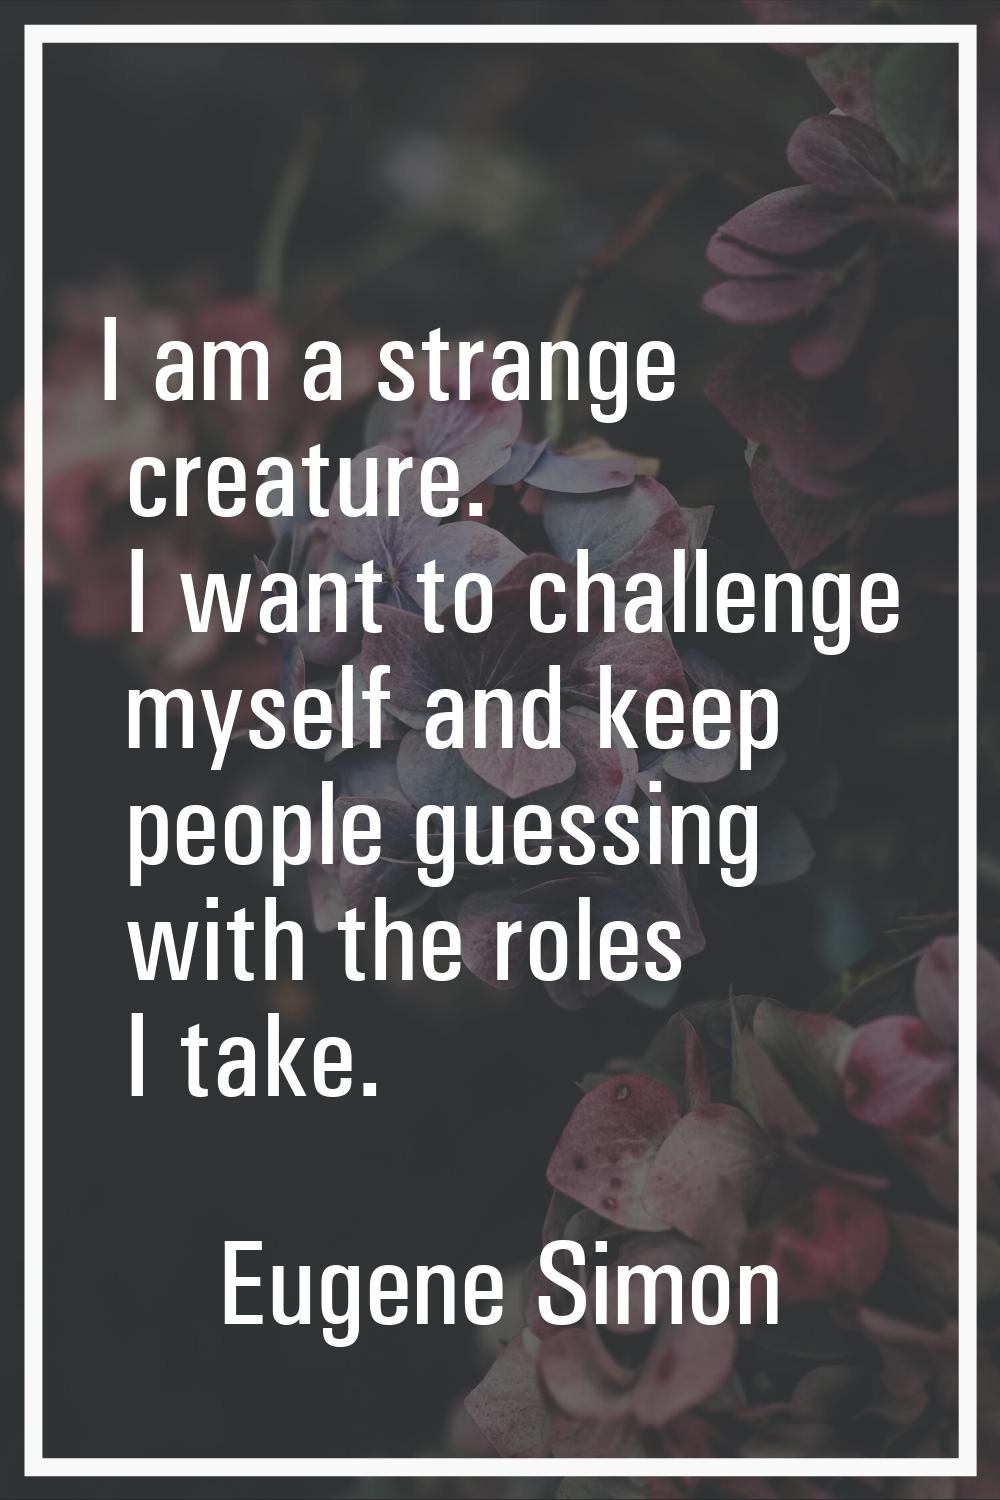 I am a strange creature. I want to challenge myself and keep people guessing with the roles I take.